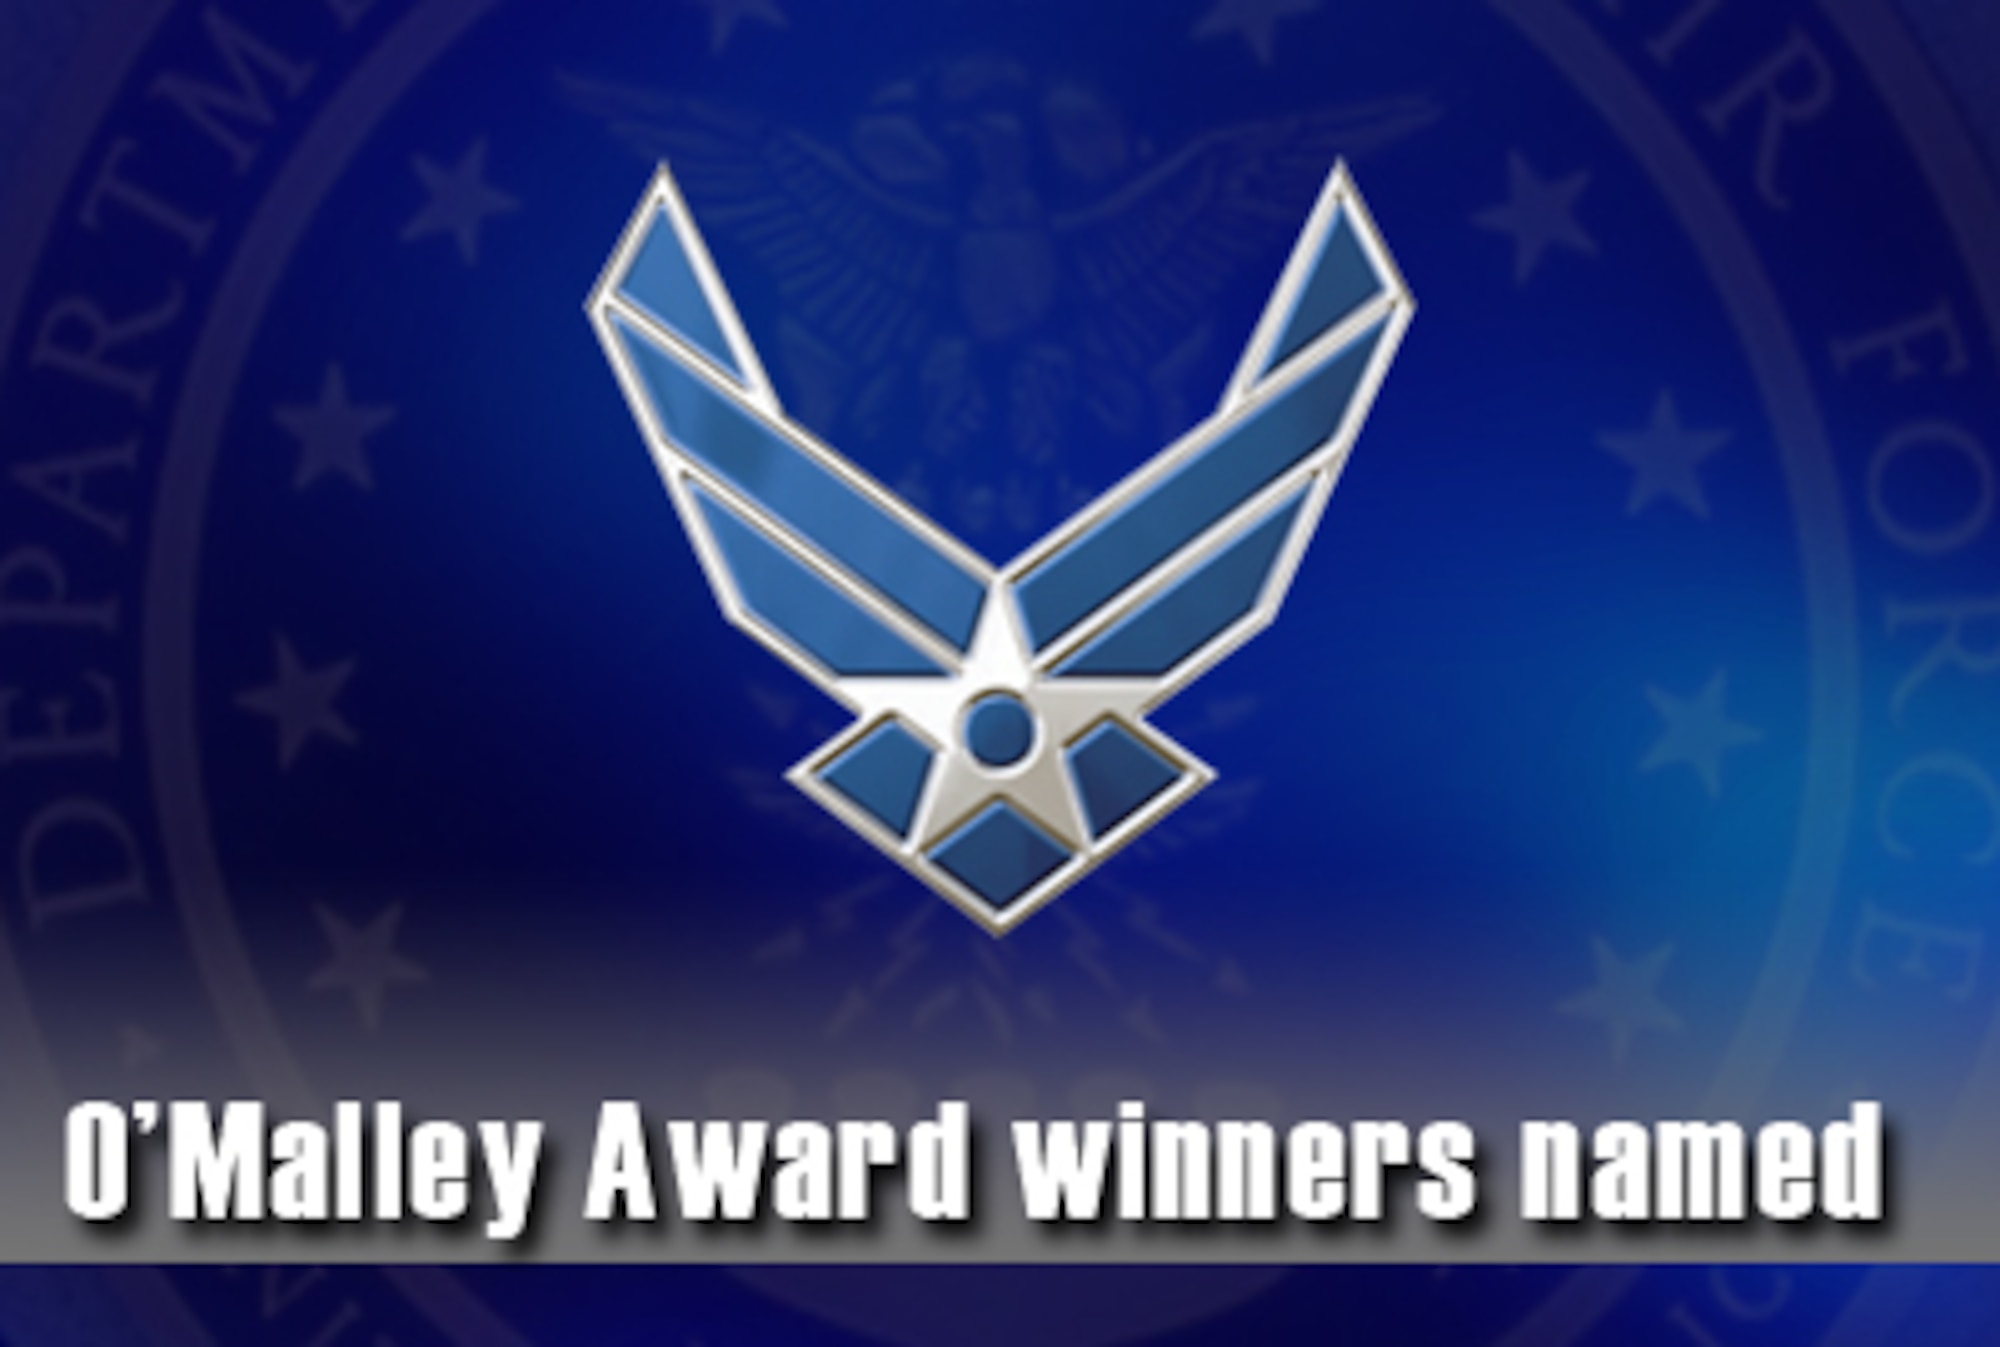 Two Airmen from Joint Base Elmendorf-Richardson, Alaska, are the recipients of the 2010 General and Mrs. Jerome F. O'Malley Award. (U.S. Air Force graphic/Corey Parrish)